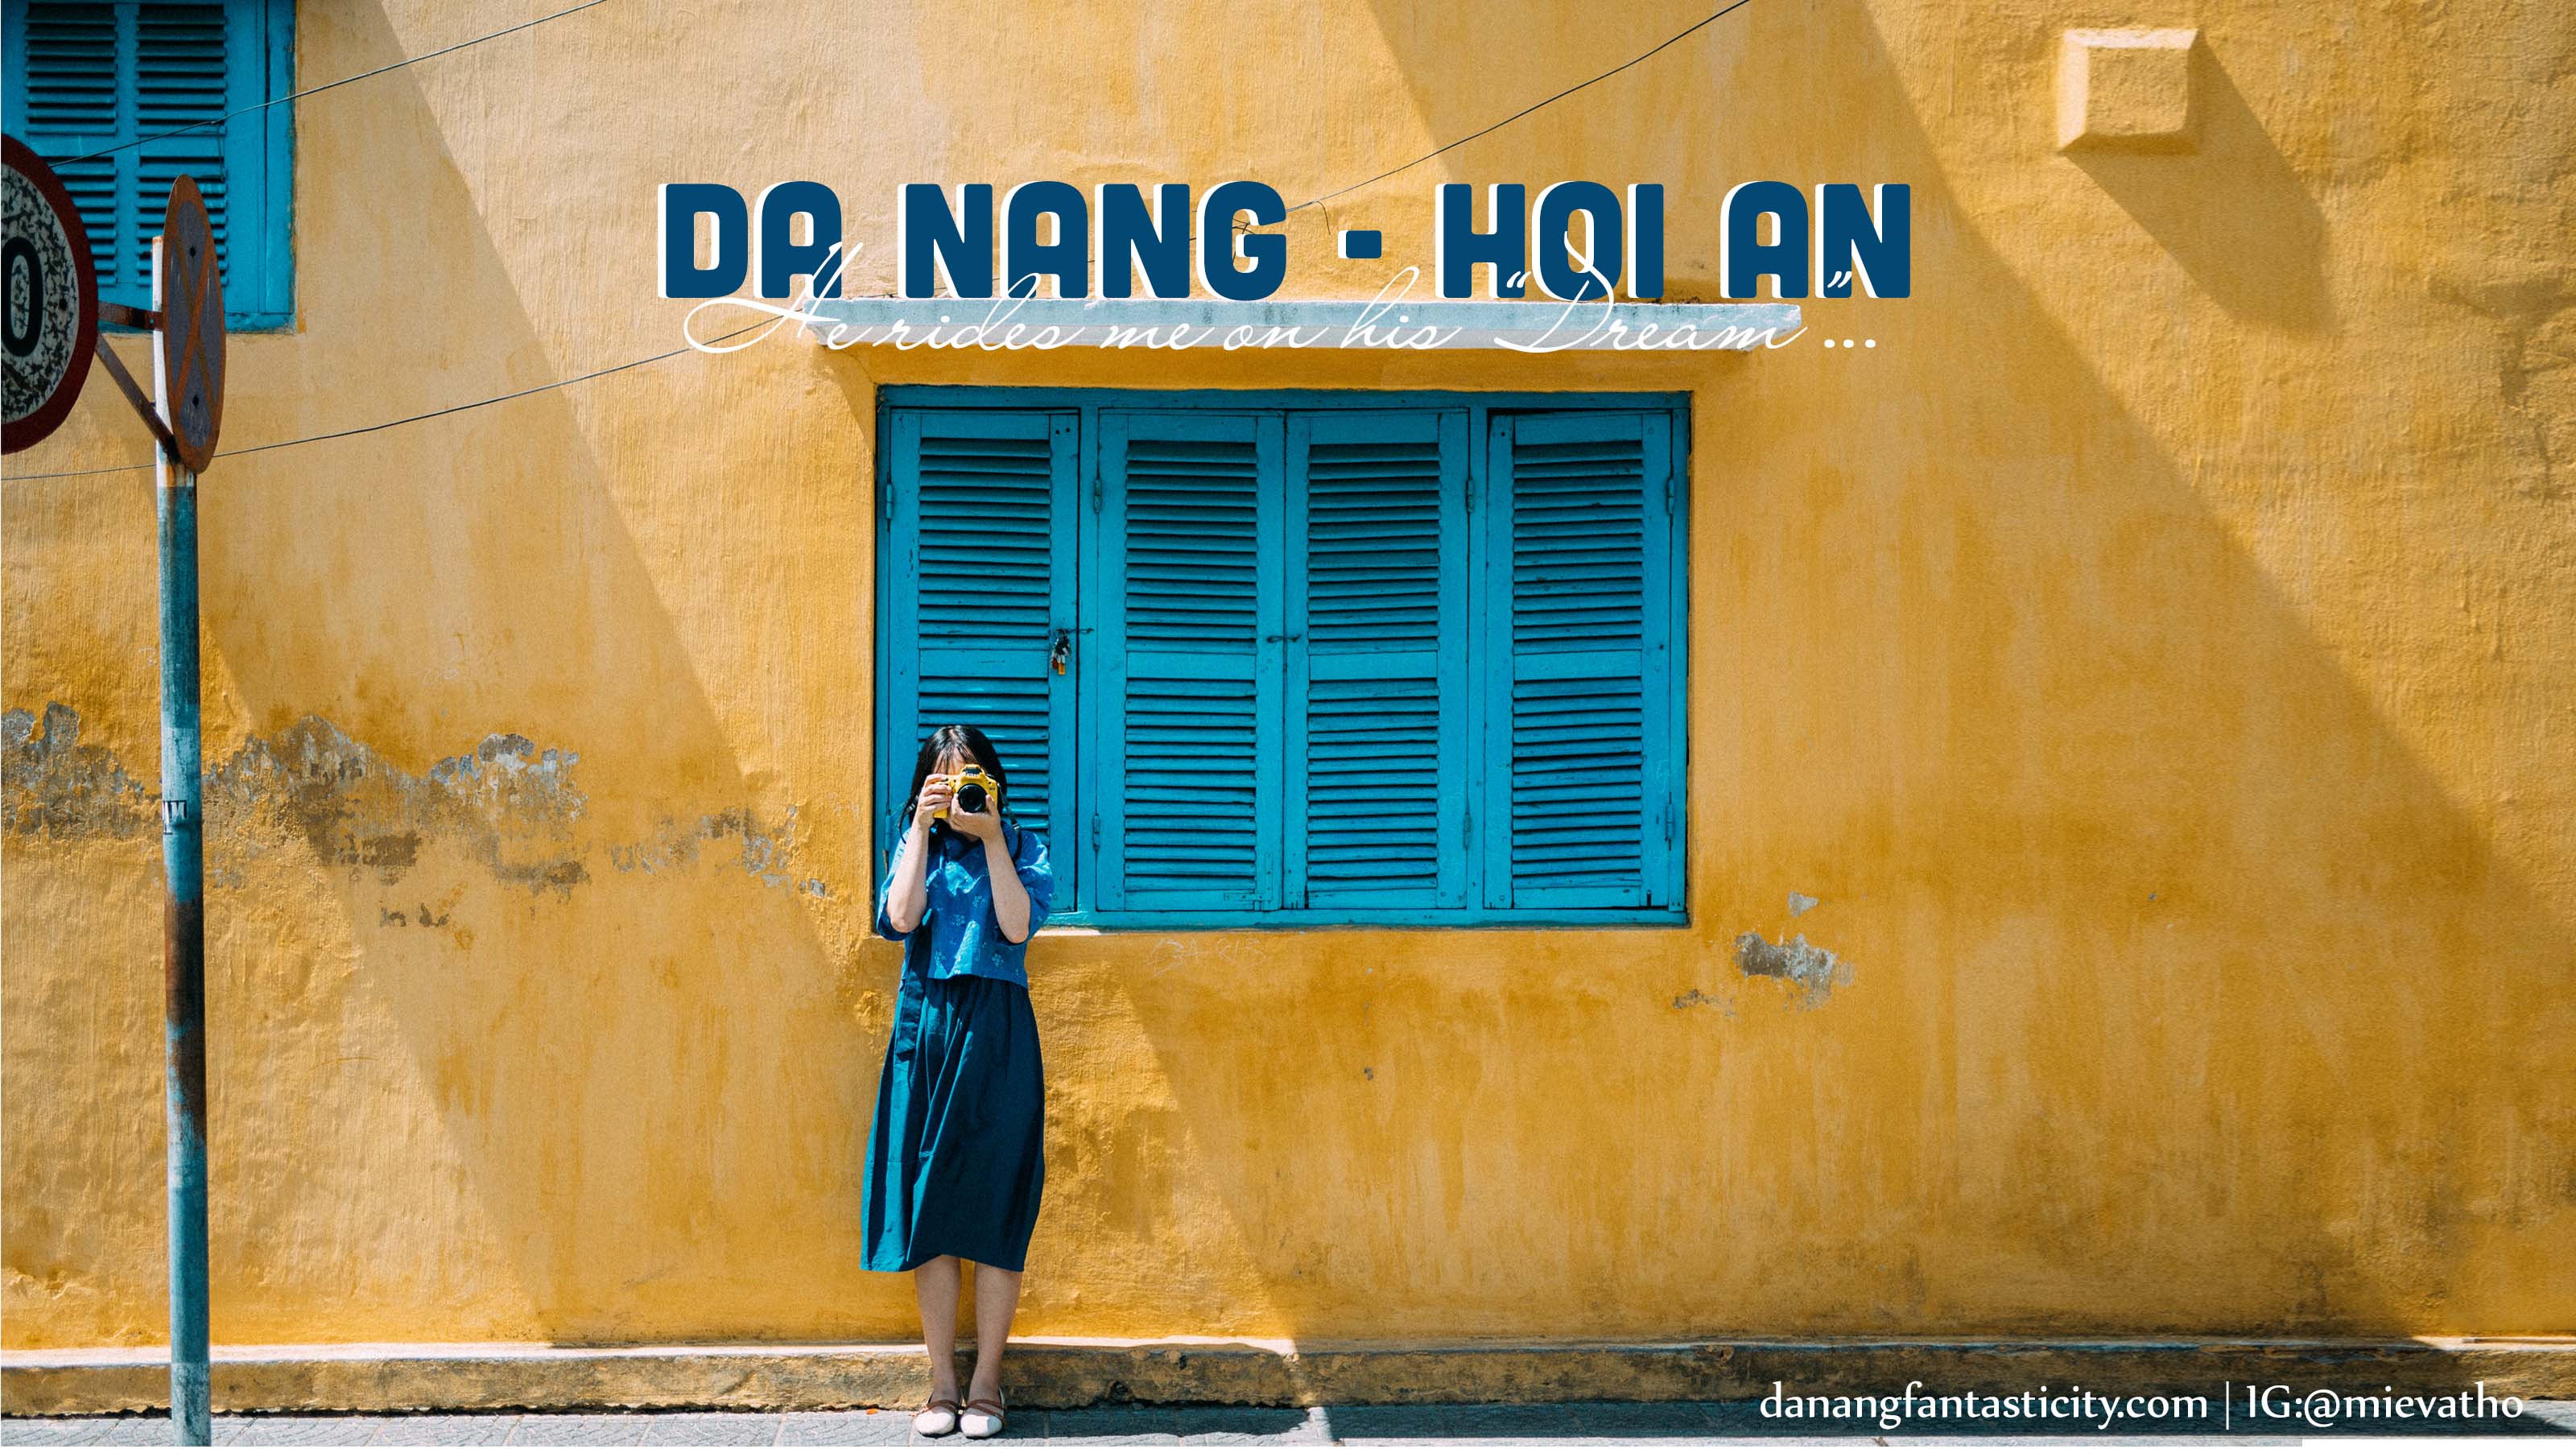 Review Danang Hoi An He Rides Me On His Dream